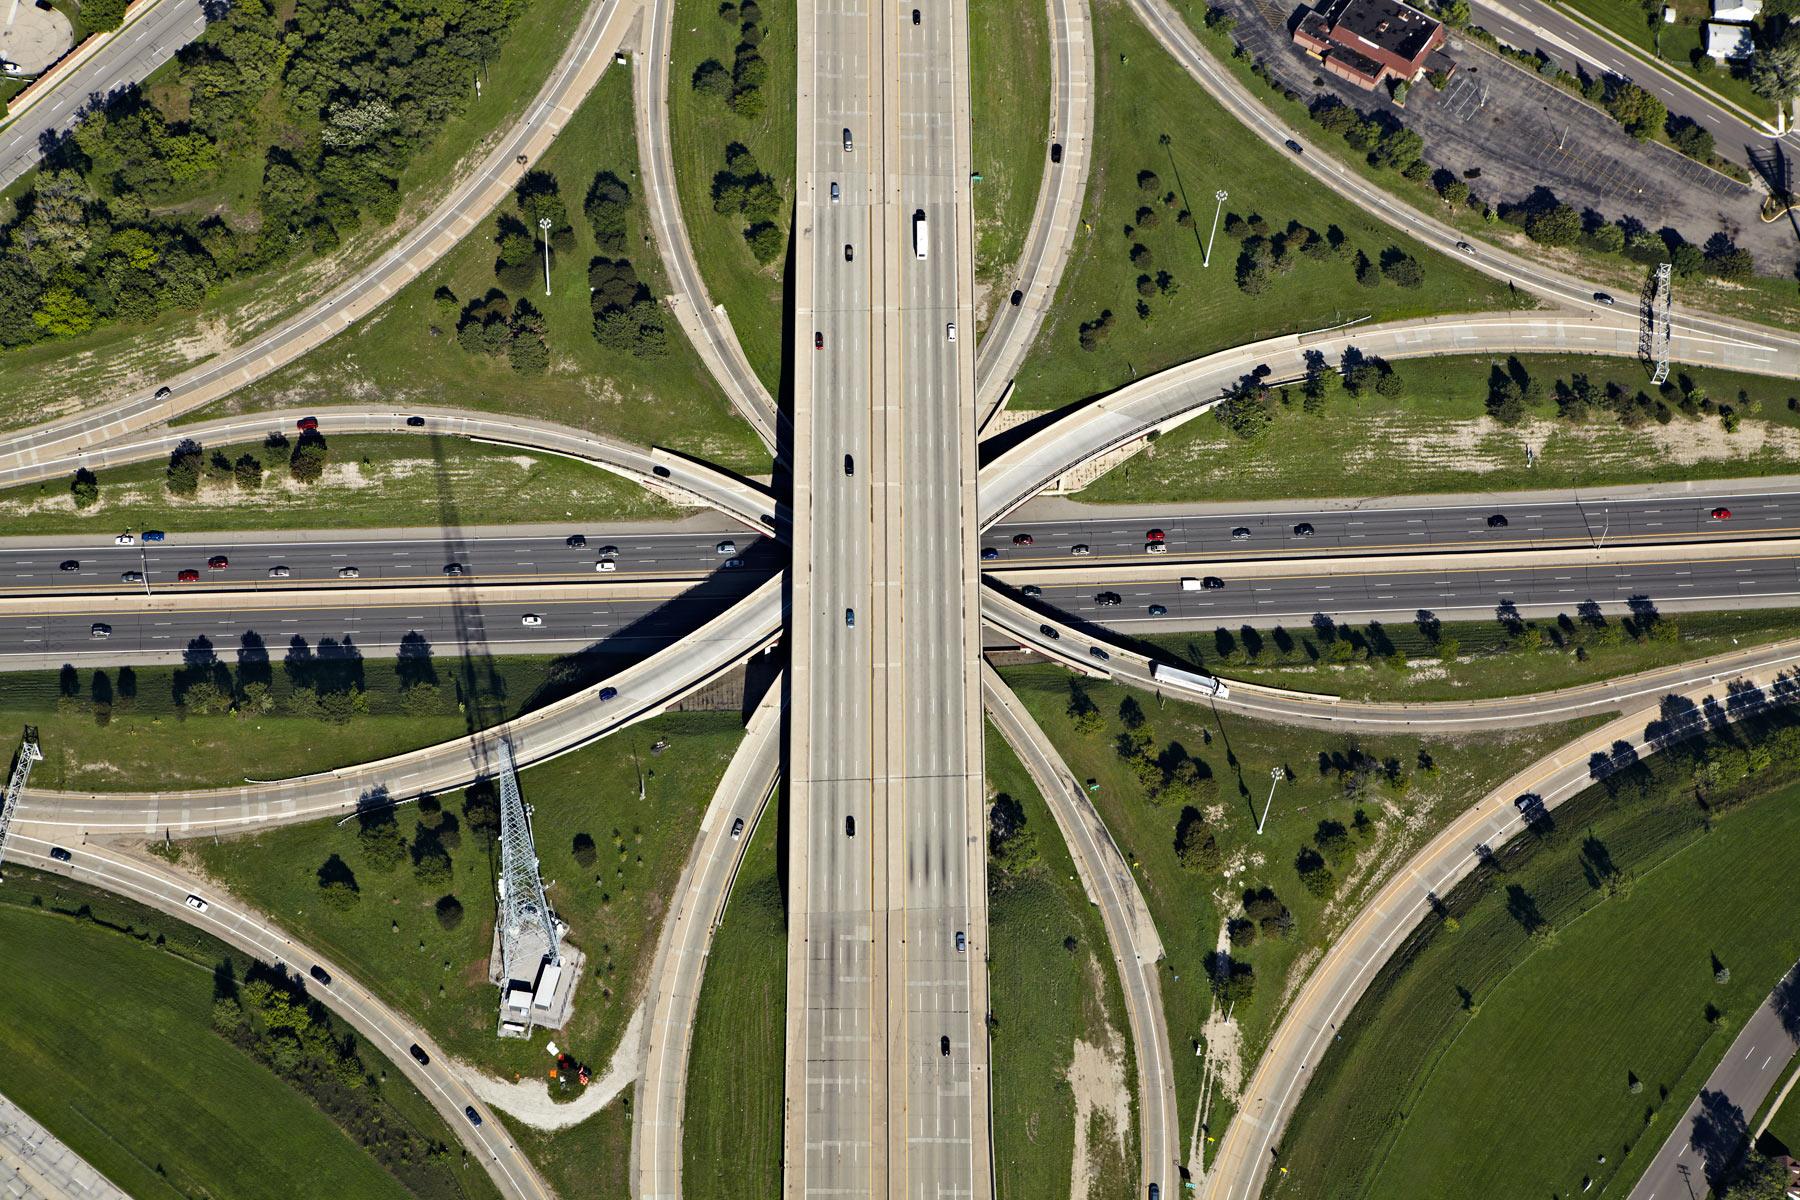 Detroit III
Digital C-Print / Archival Pigment Print
Edition of 10 per size
Available sizes:
40 x 60 in
60 x 90 in

Since its inception, Lusztyk’s Interchanges project has taken the artist all over the world in search of a very particular subject: